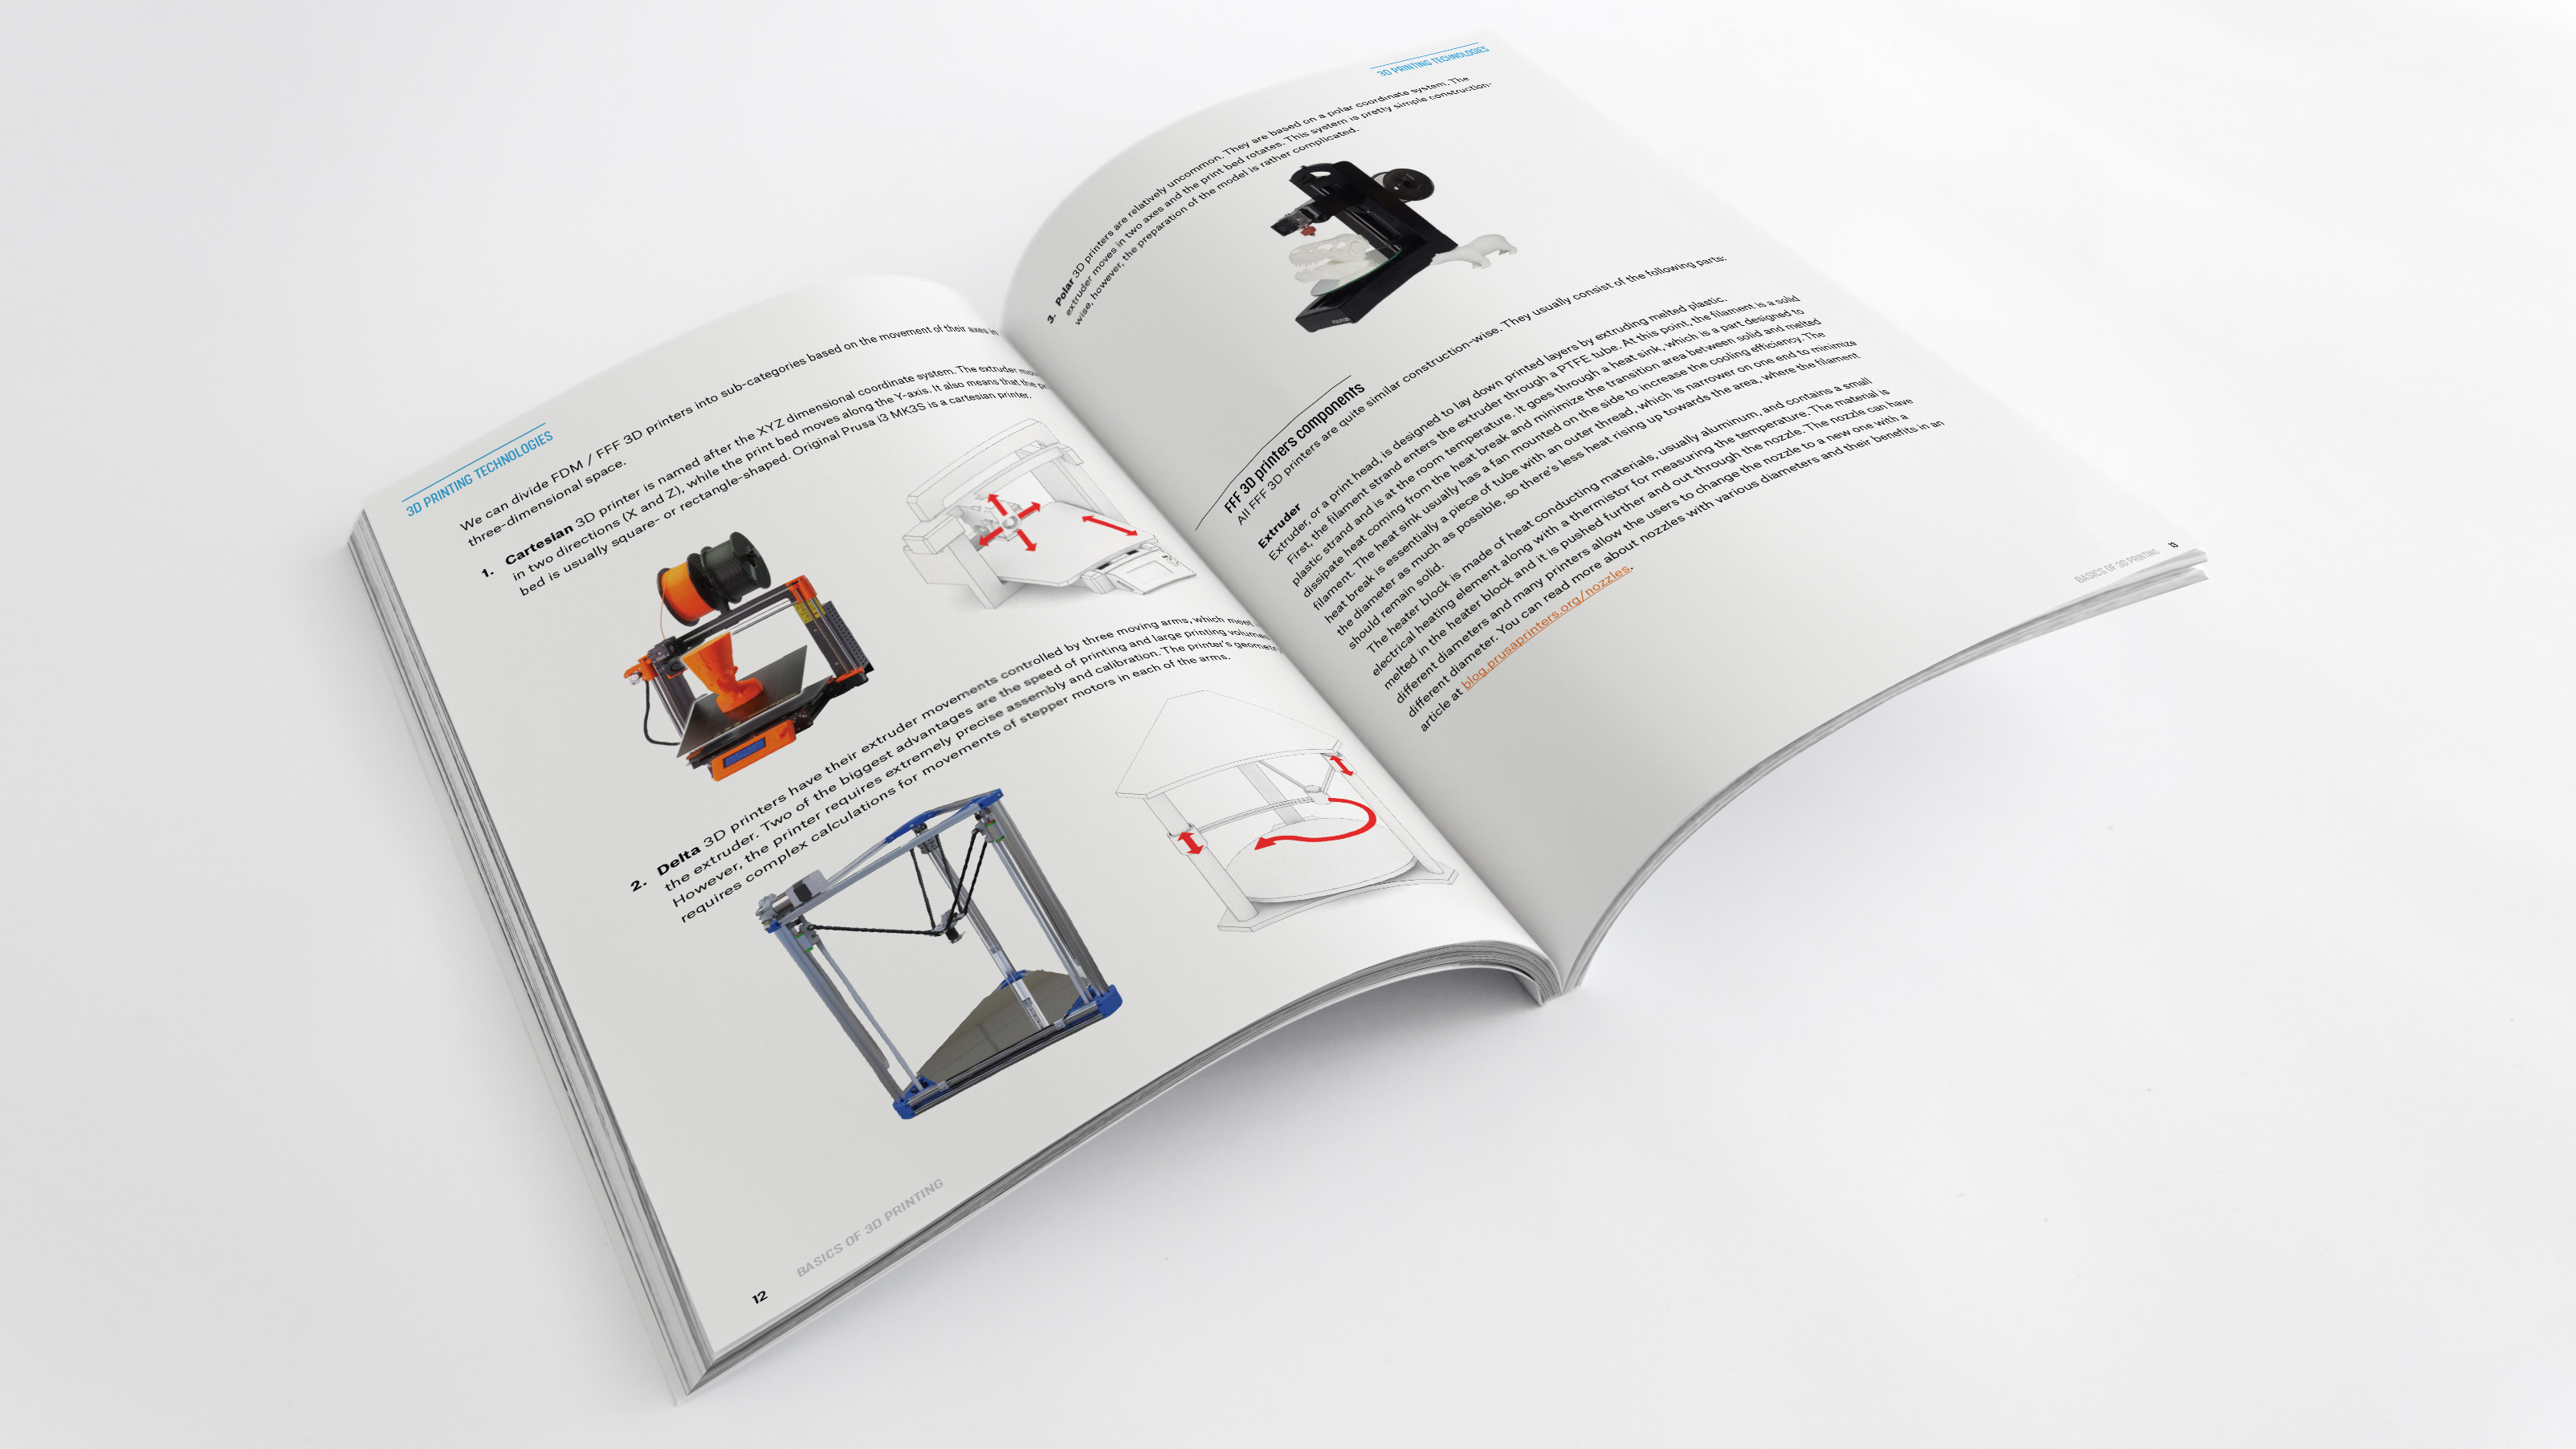 picture the book of basics of 3d printing